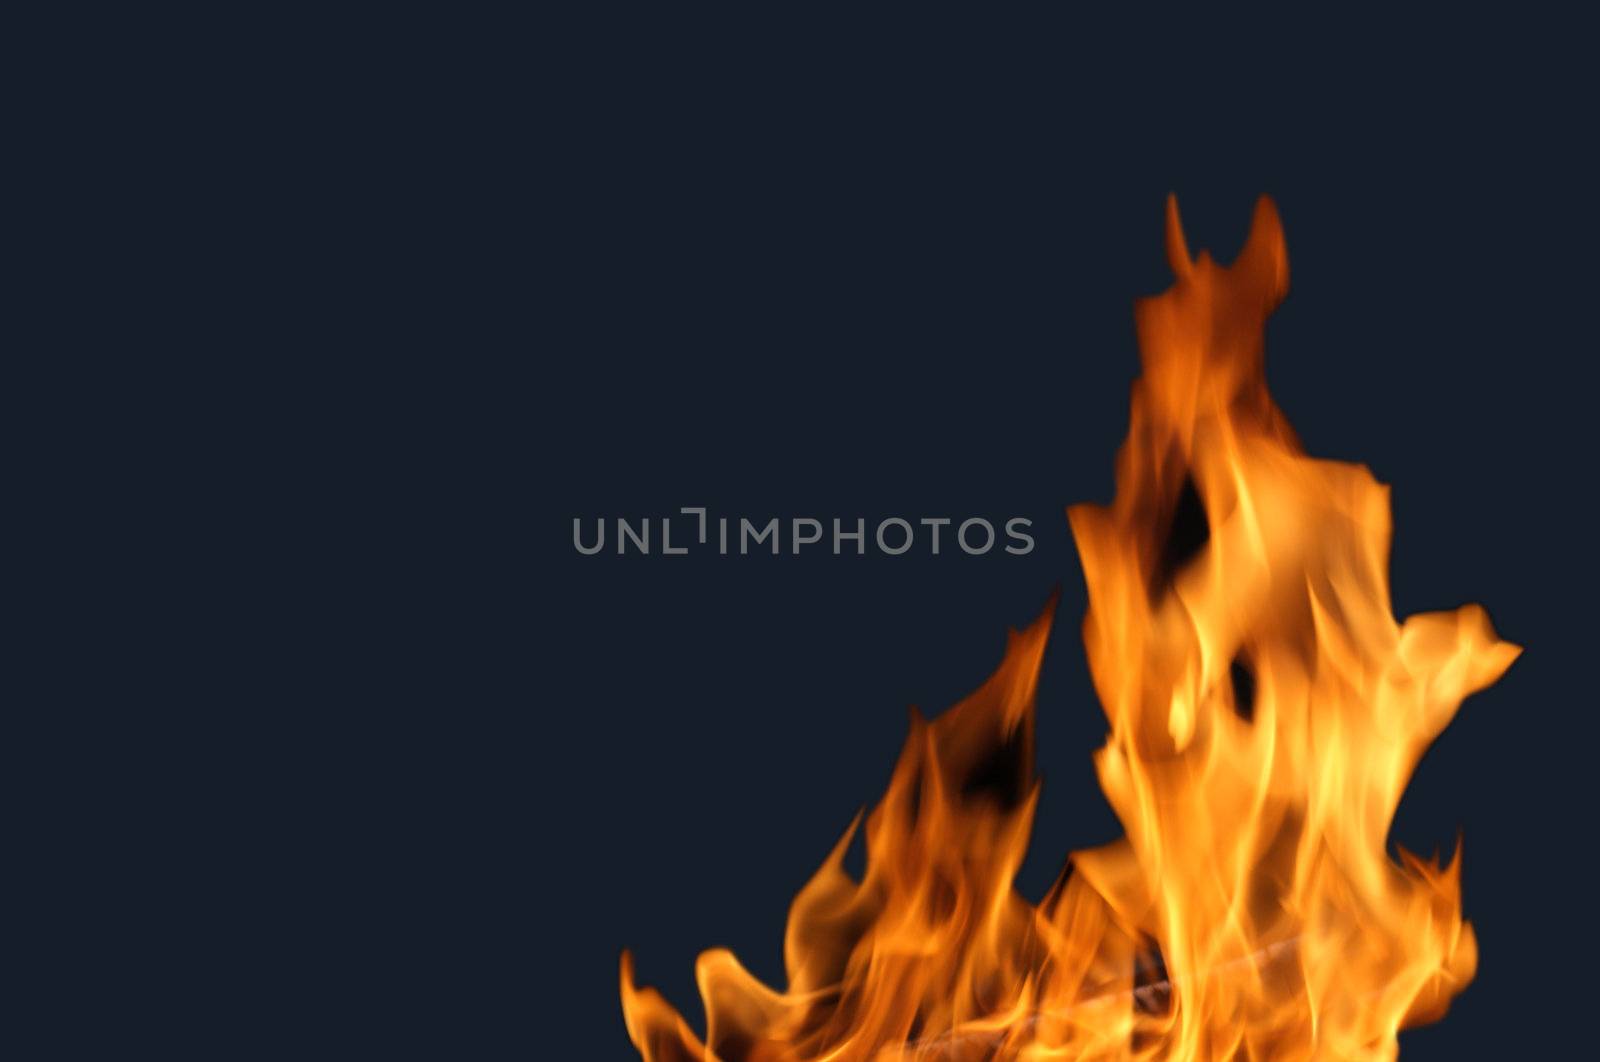 Single fire flame isolated on black background with copy space